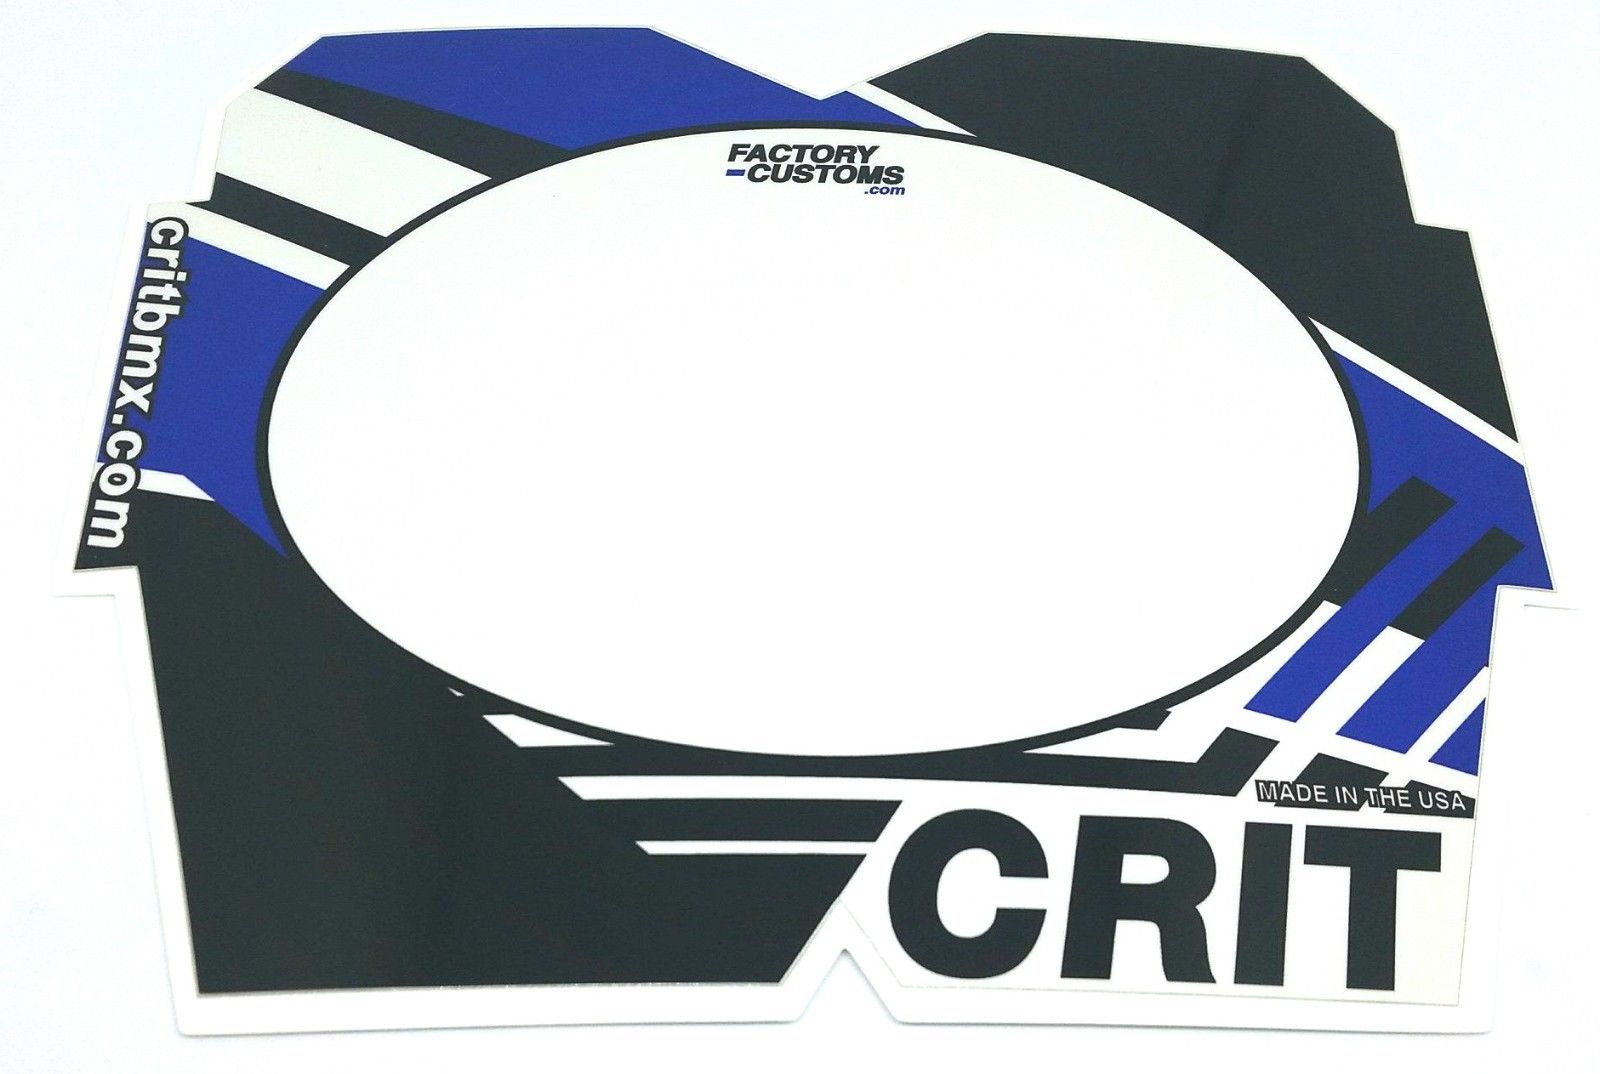 Crit BMX Pro Number Plate -  Blue Color Block Graphics - USA Made